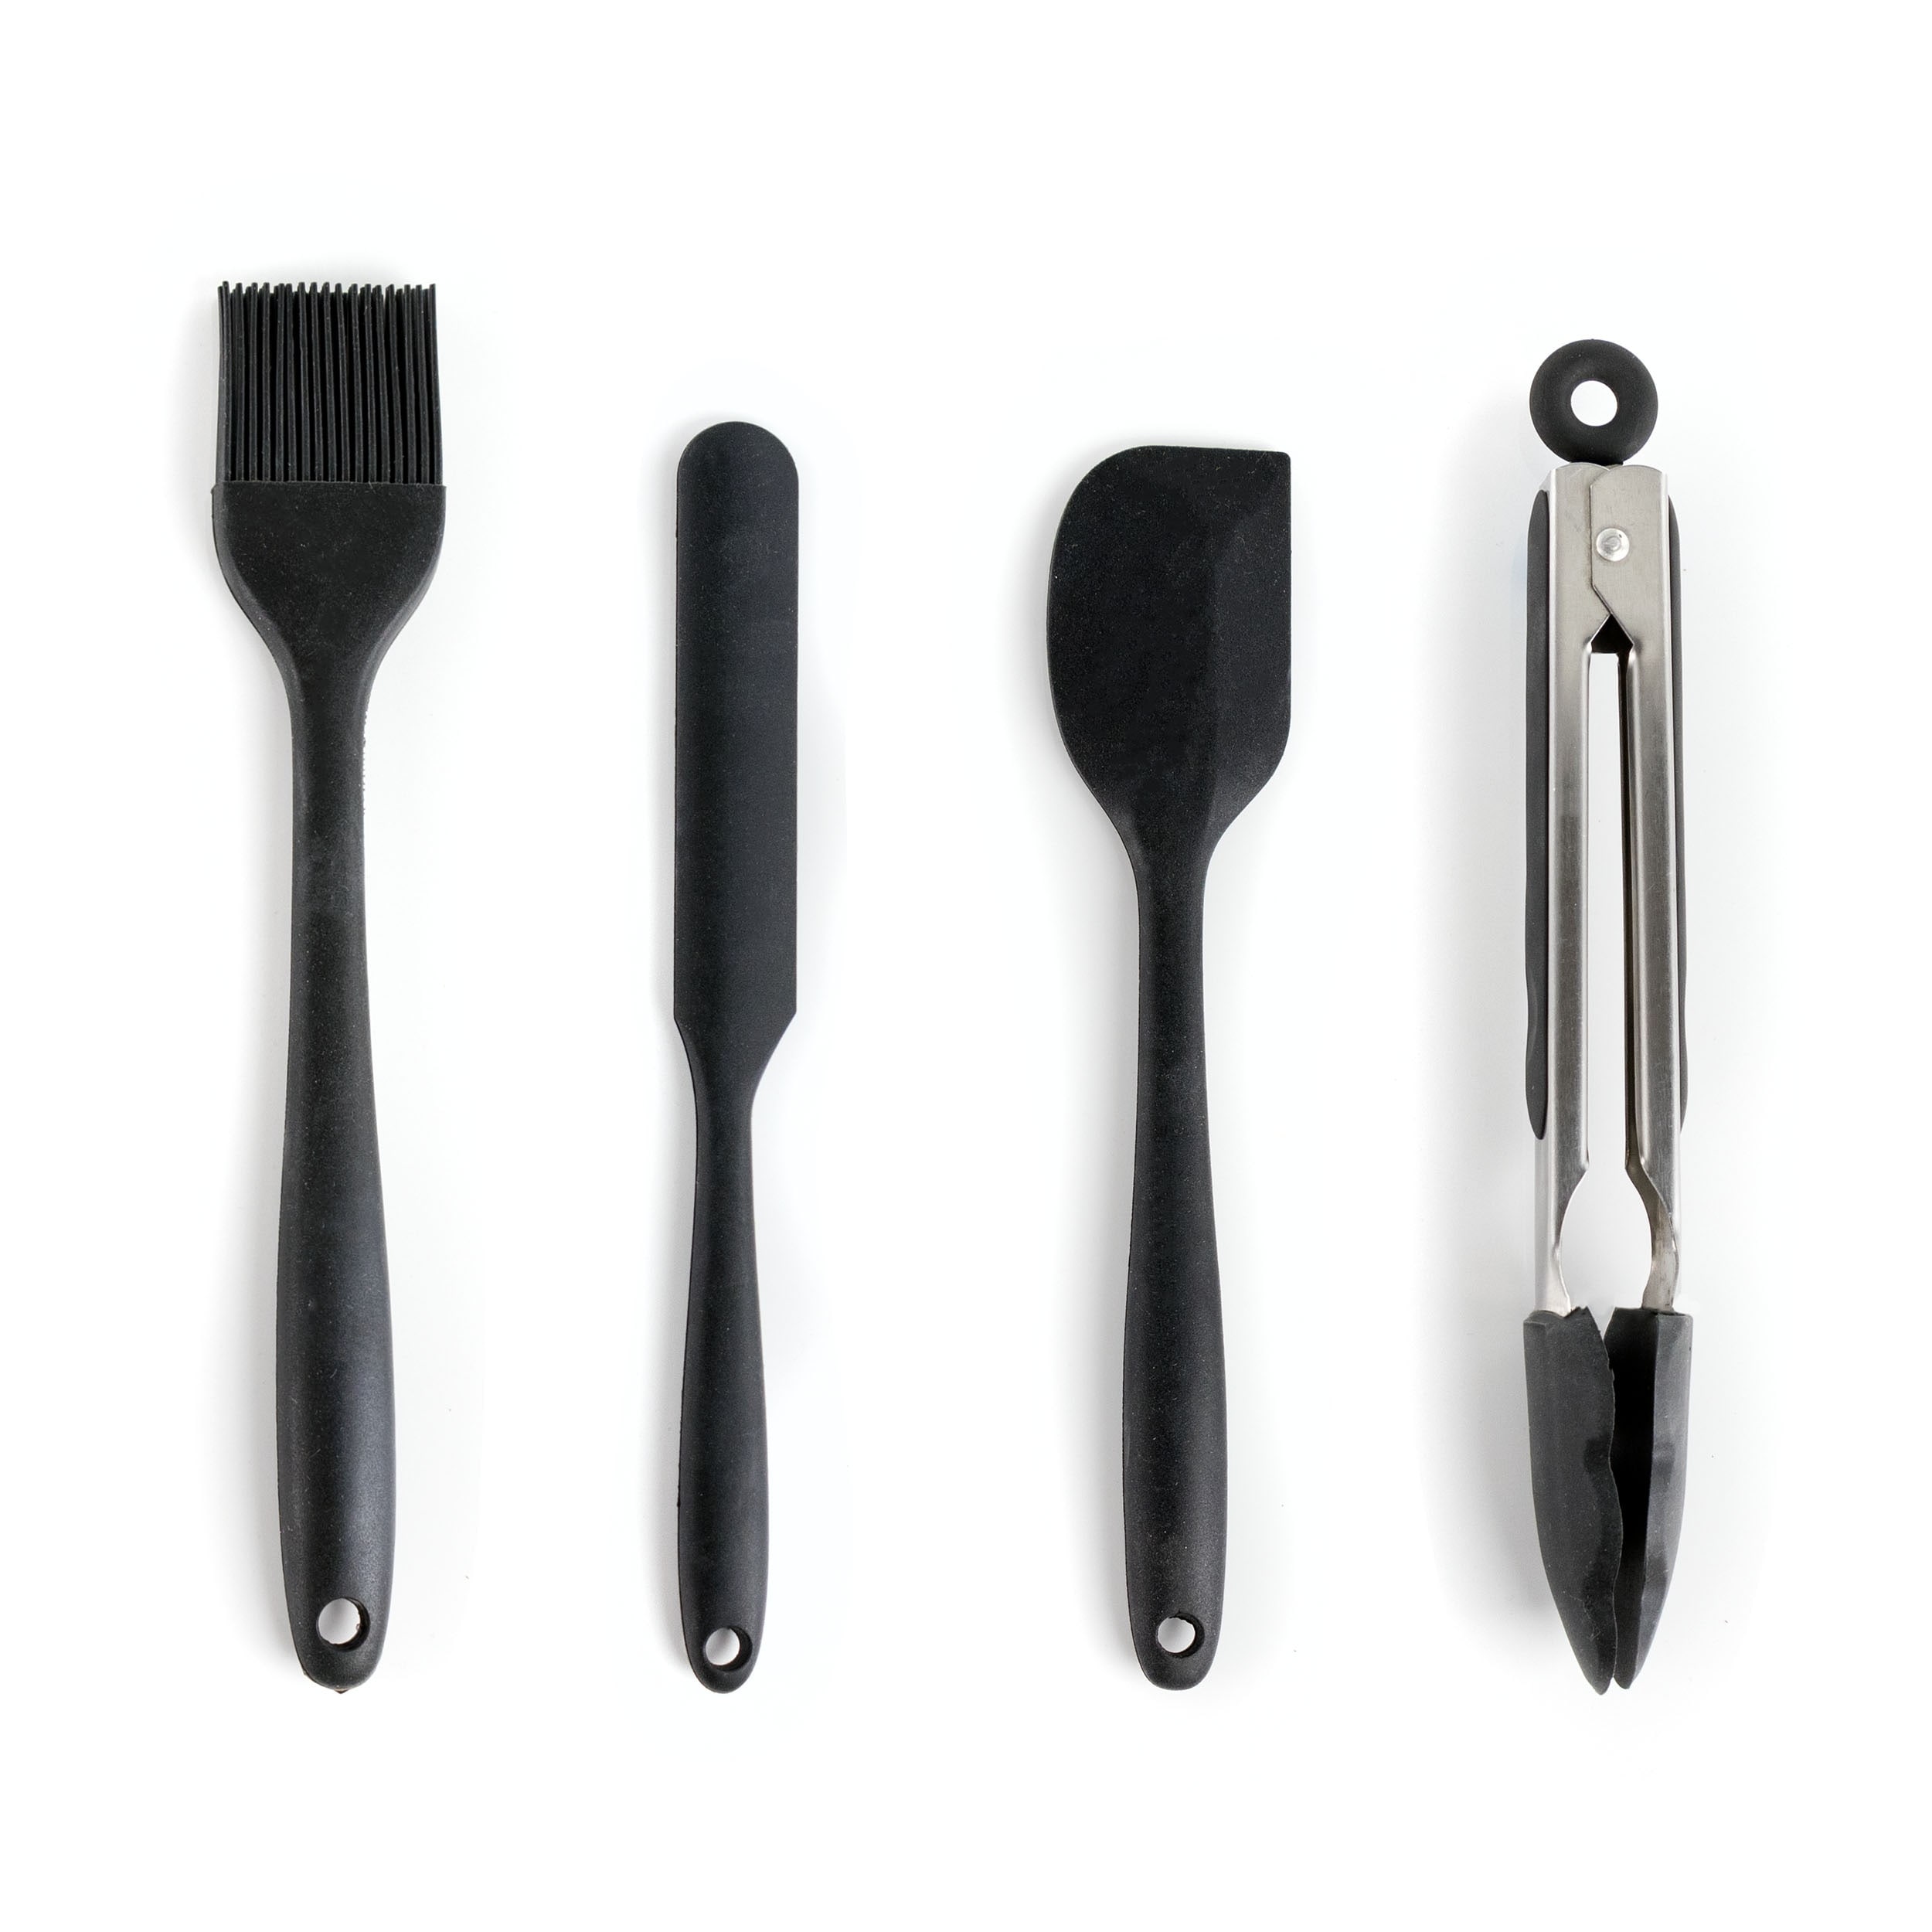 MegaChef Black Silicone and Wood Cooking Utensils, Set of 12 - 9884604